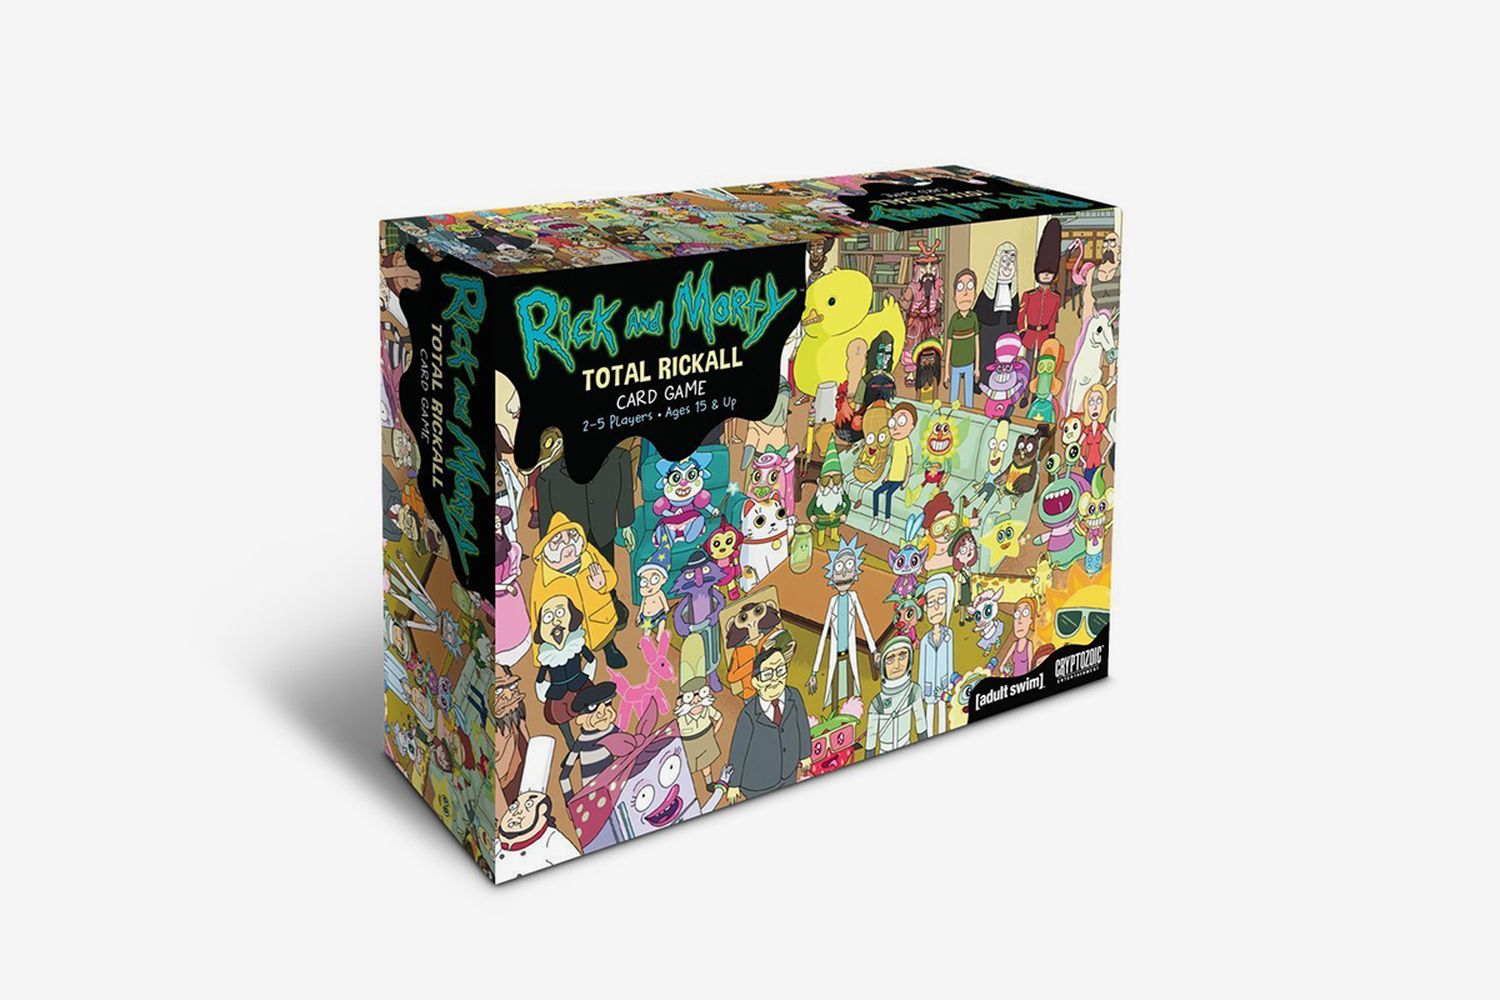 Rick and Morty 'Total Rickall' Cooperative Card Game